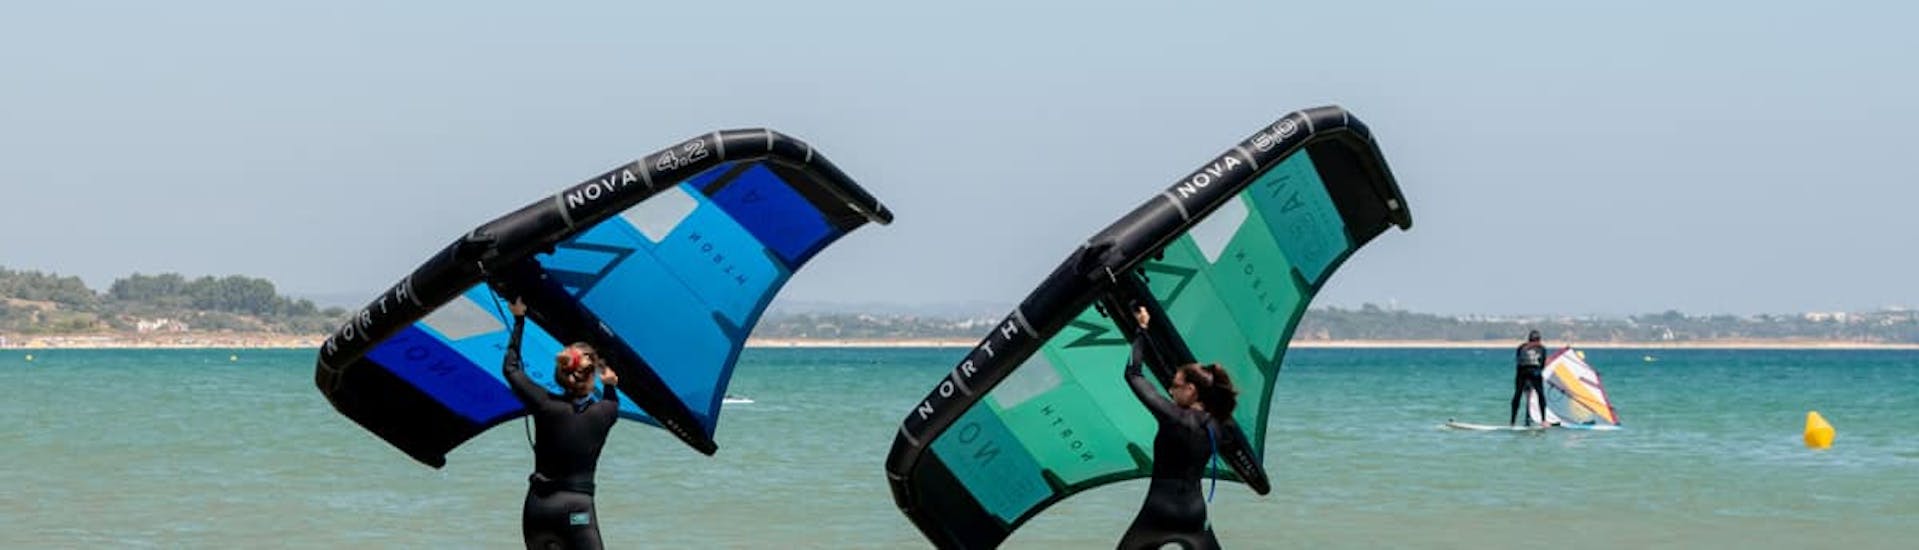 Two people during the semi private wingfoiling lessons organized by Algarve Watersports.